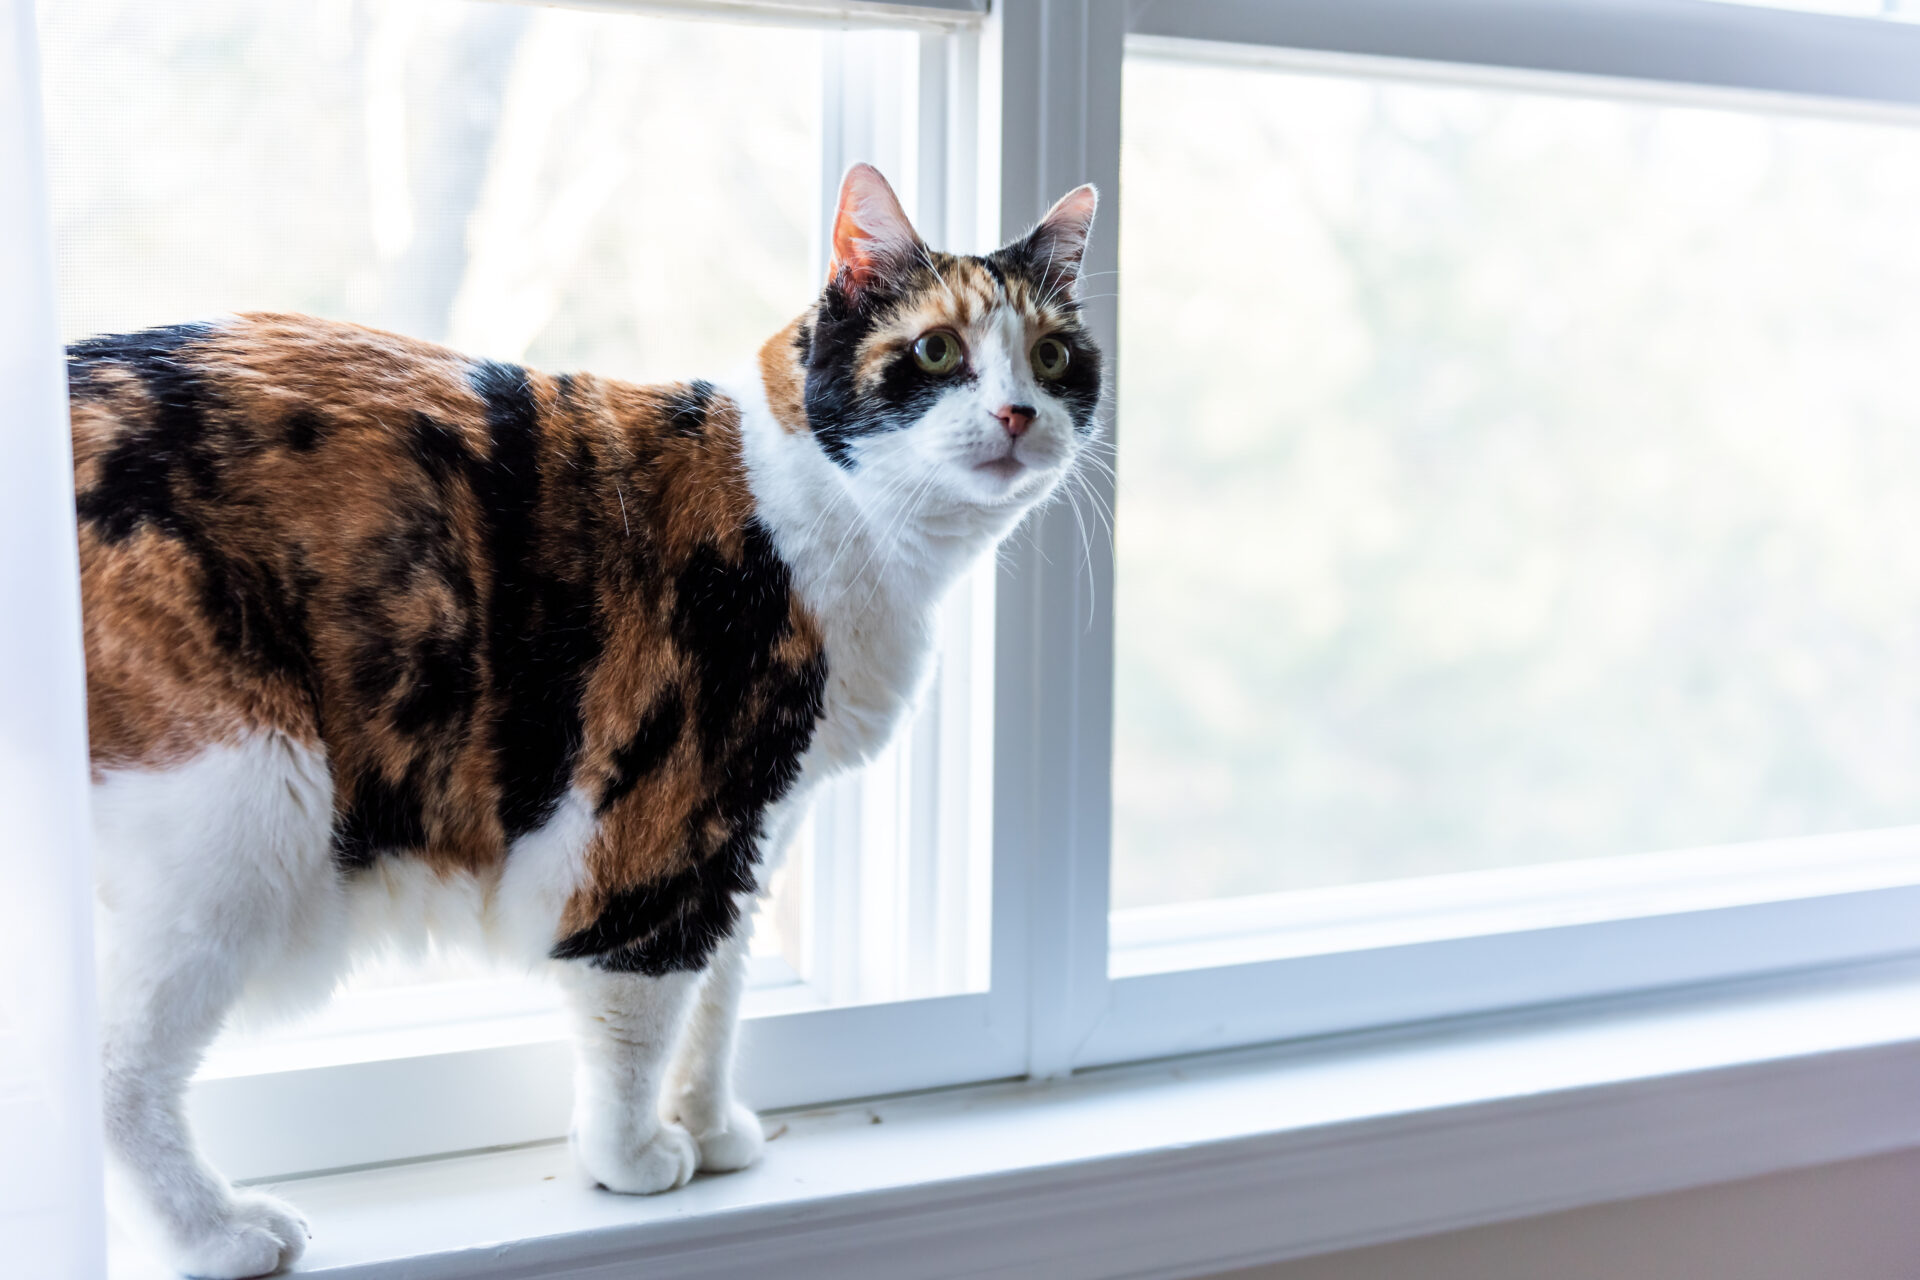 Cat standing next to raised window blinds inside room. Wholesale Blind Factory.